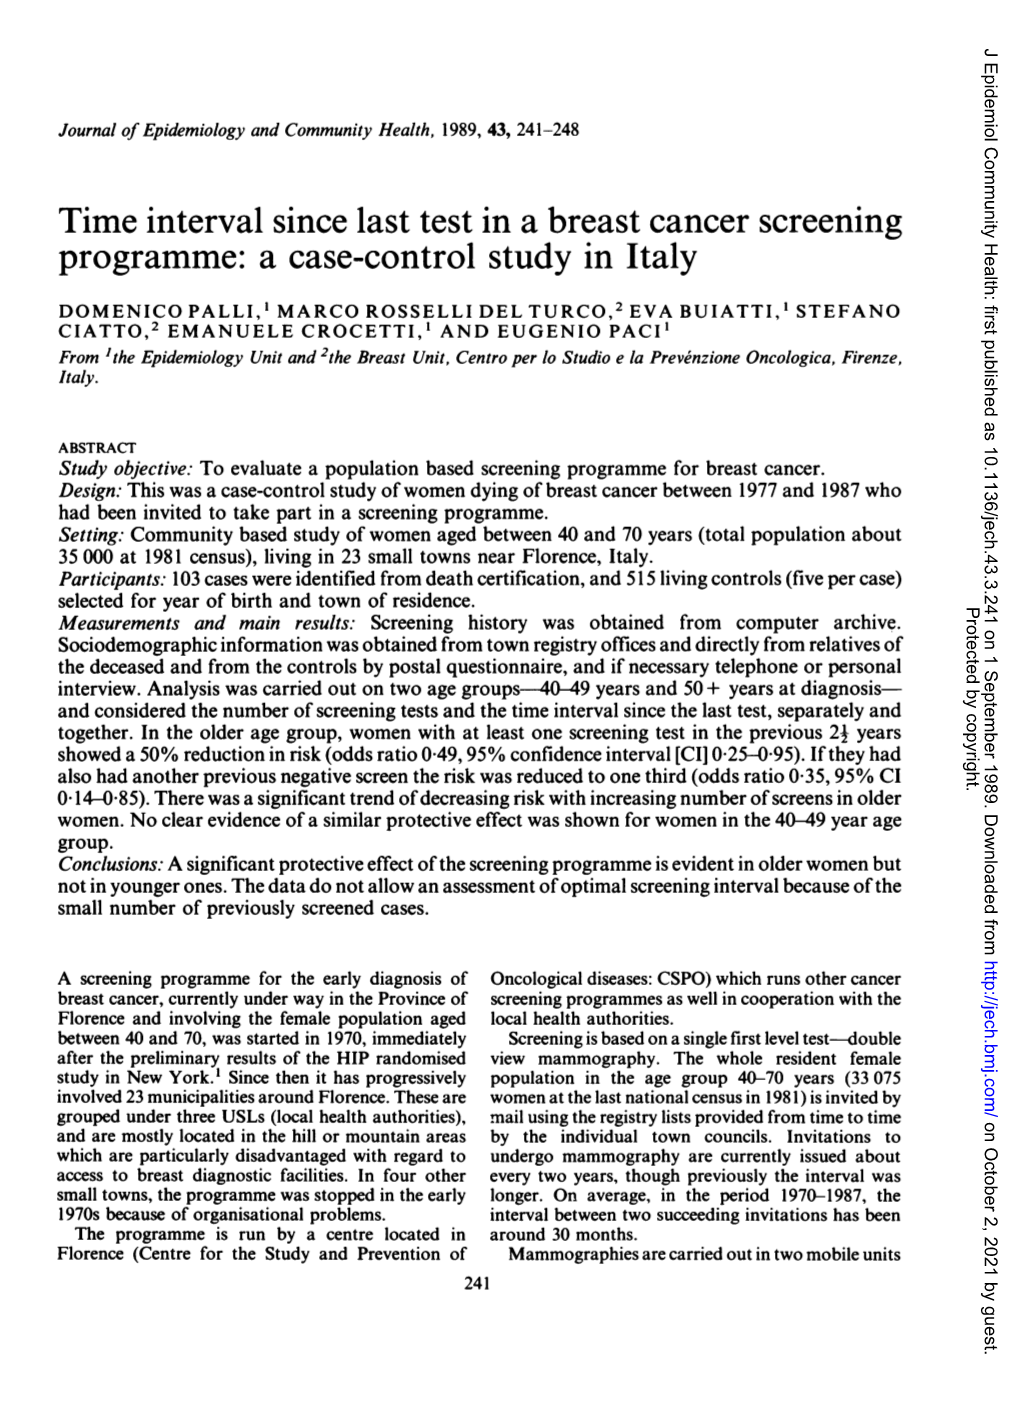 Time Interval Since Last Test in a Breast Cancer Screening Programme: a Case-Control Study in Italy